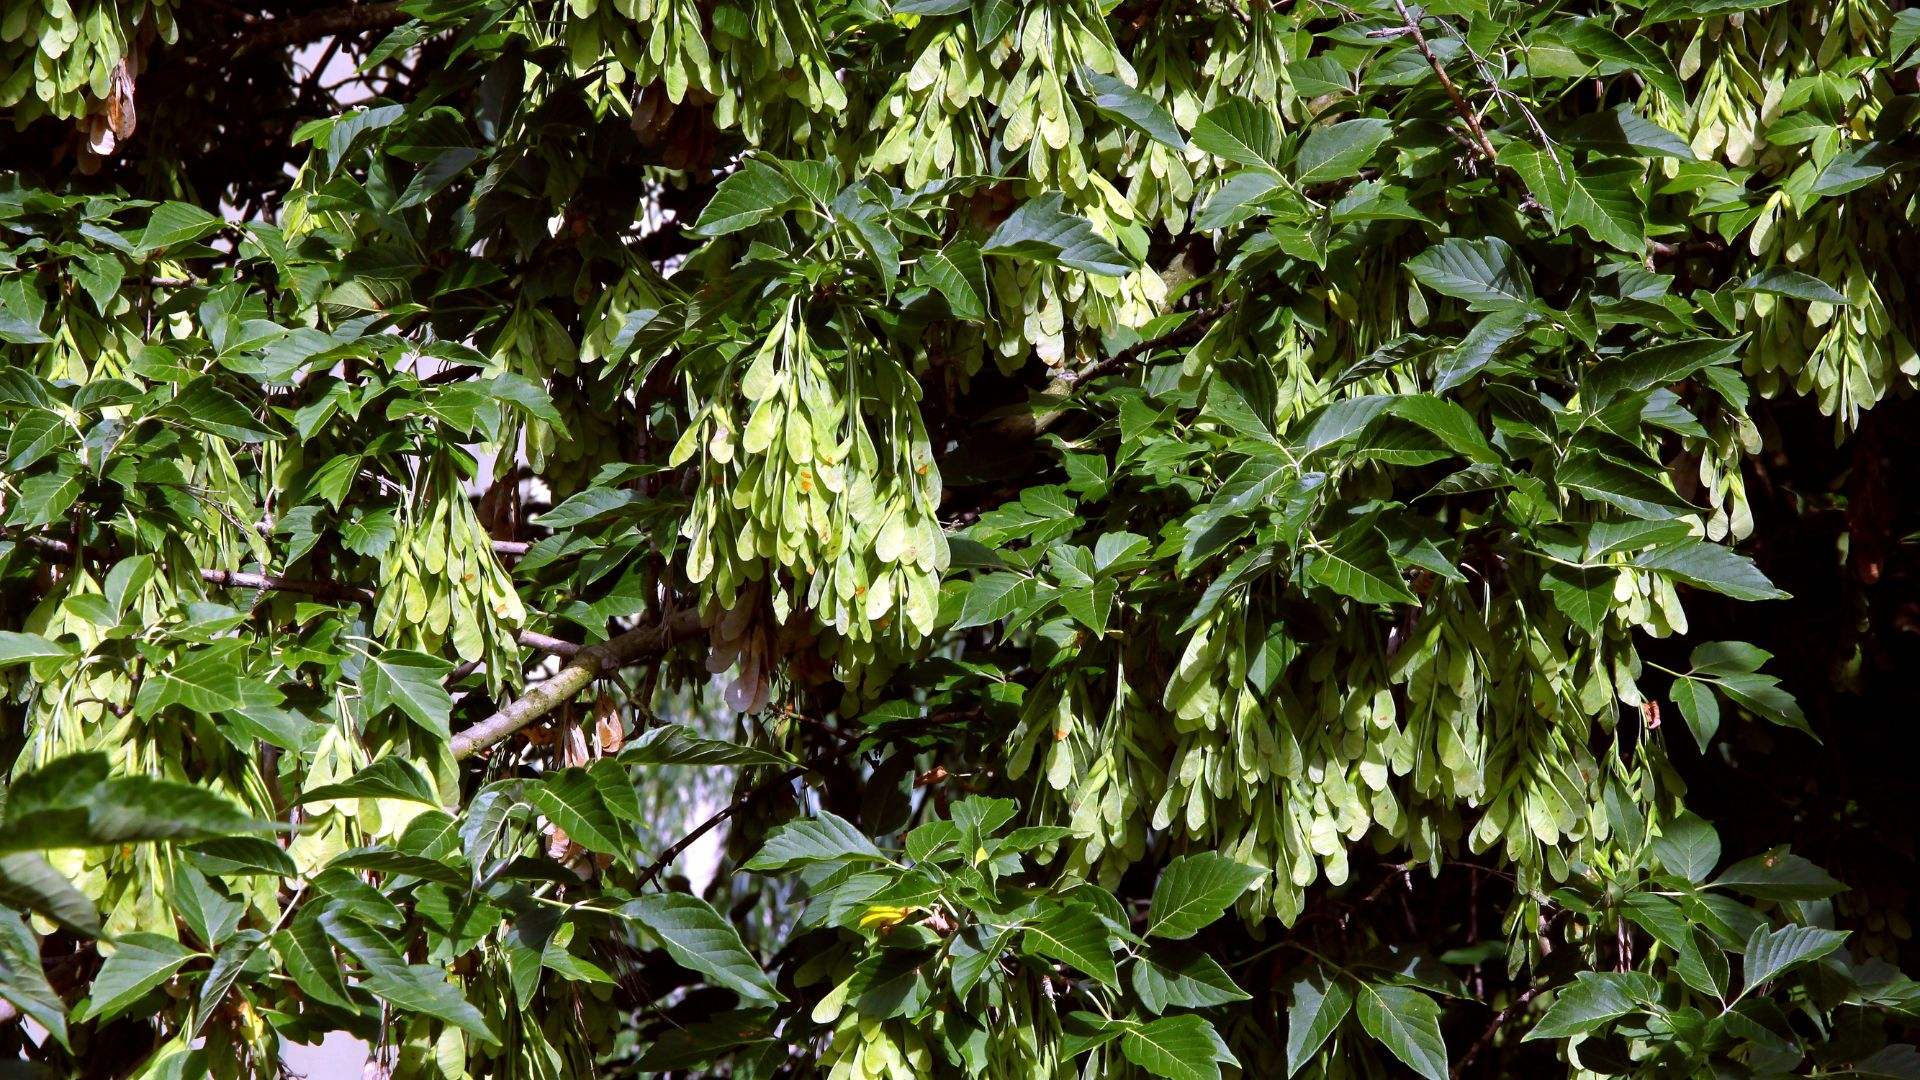 An image of a box elder tree with seedpods.